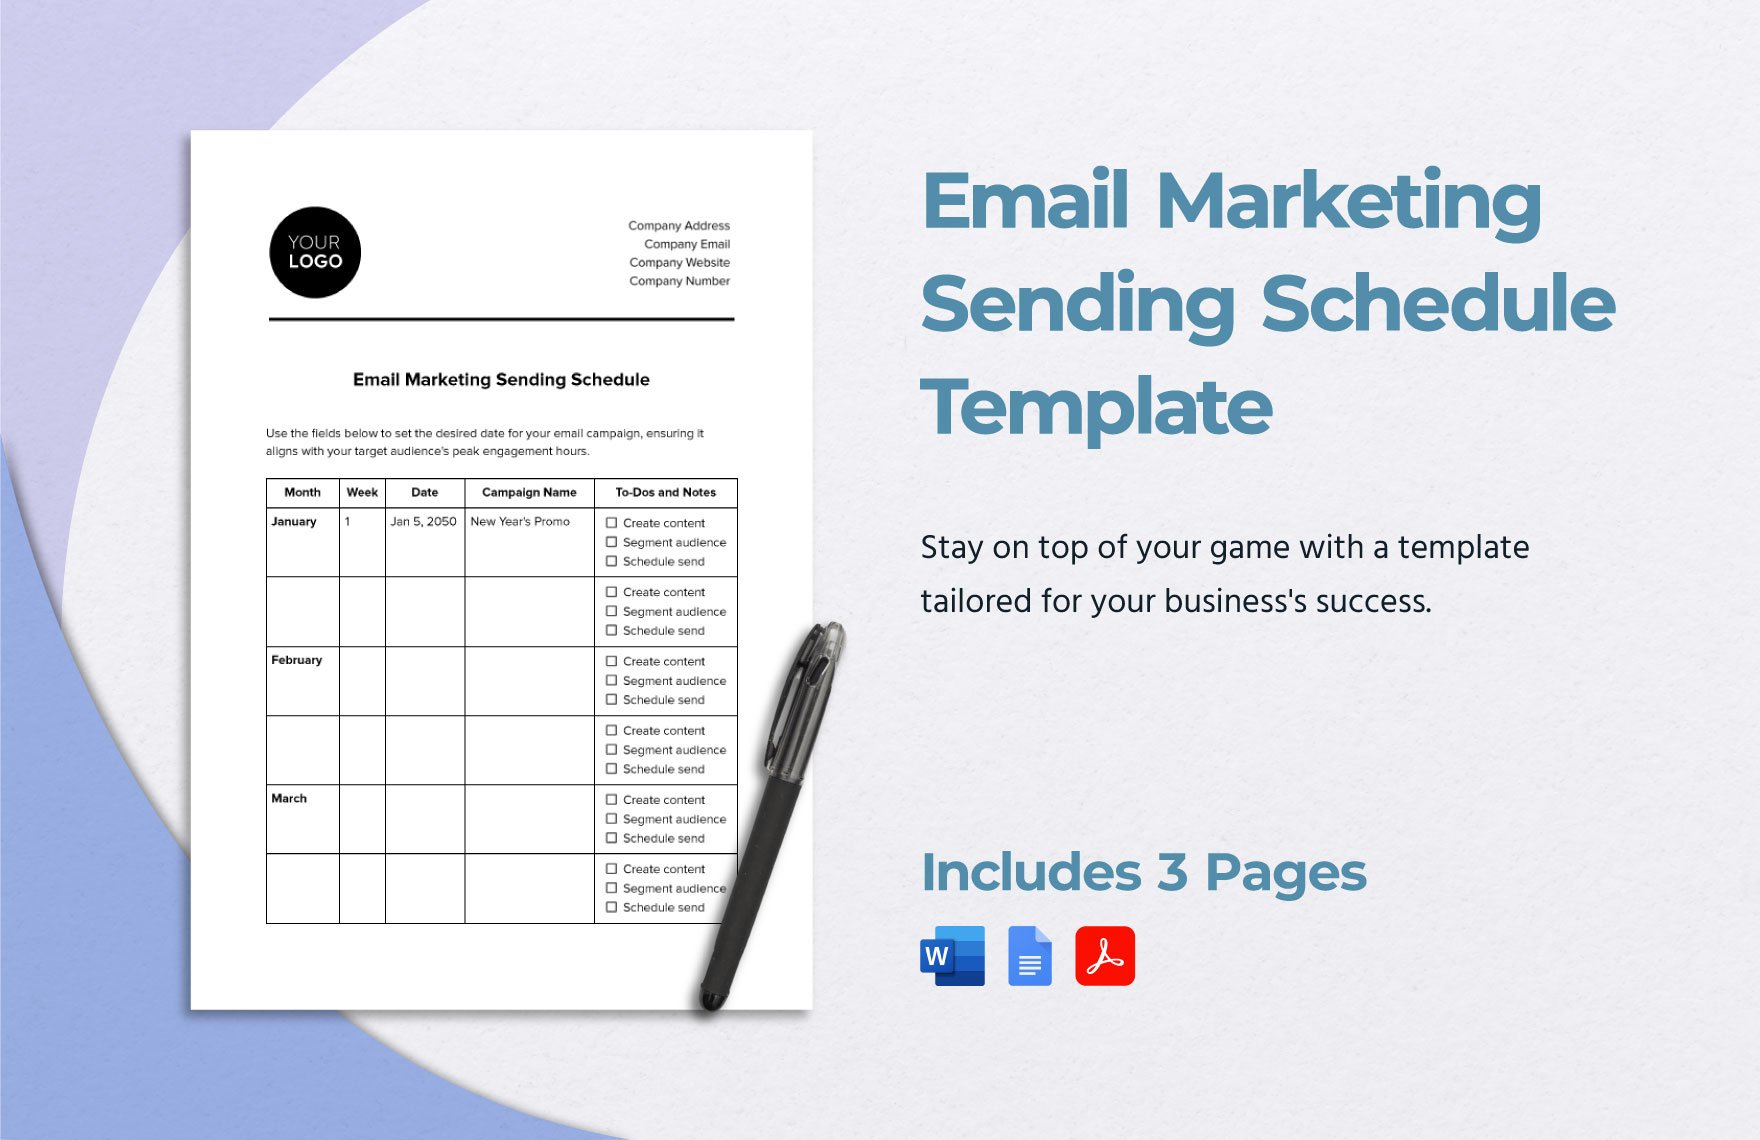 Email Marketing Sending Schedule Template